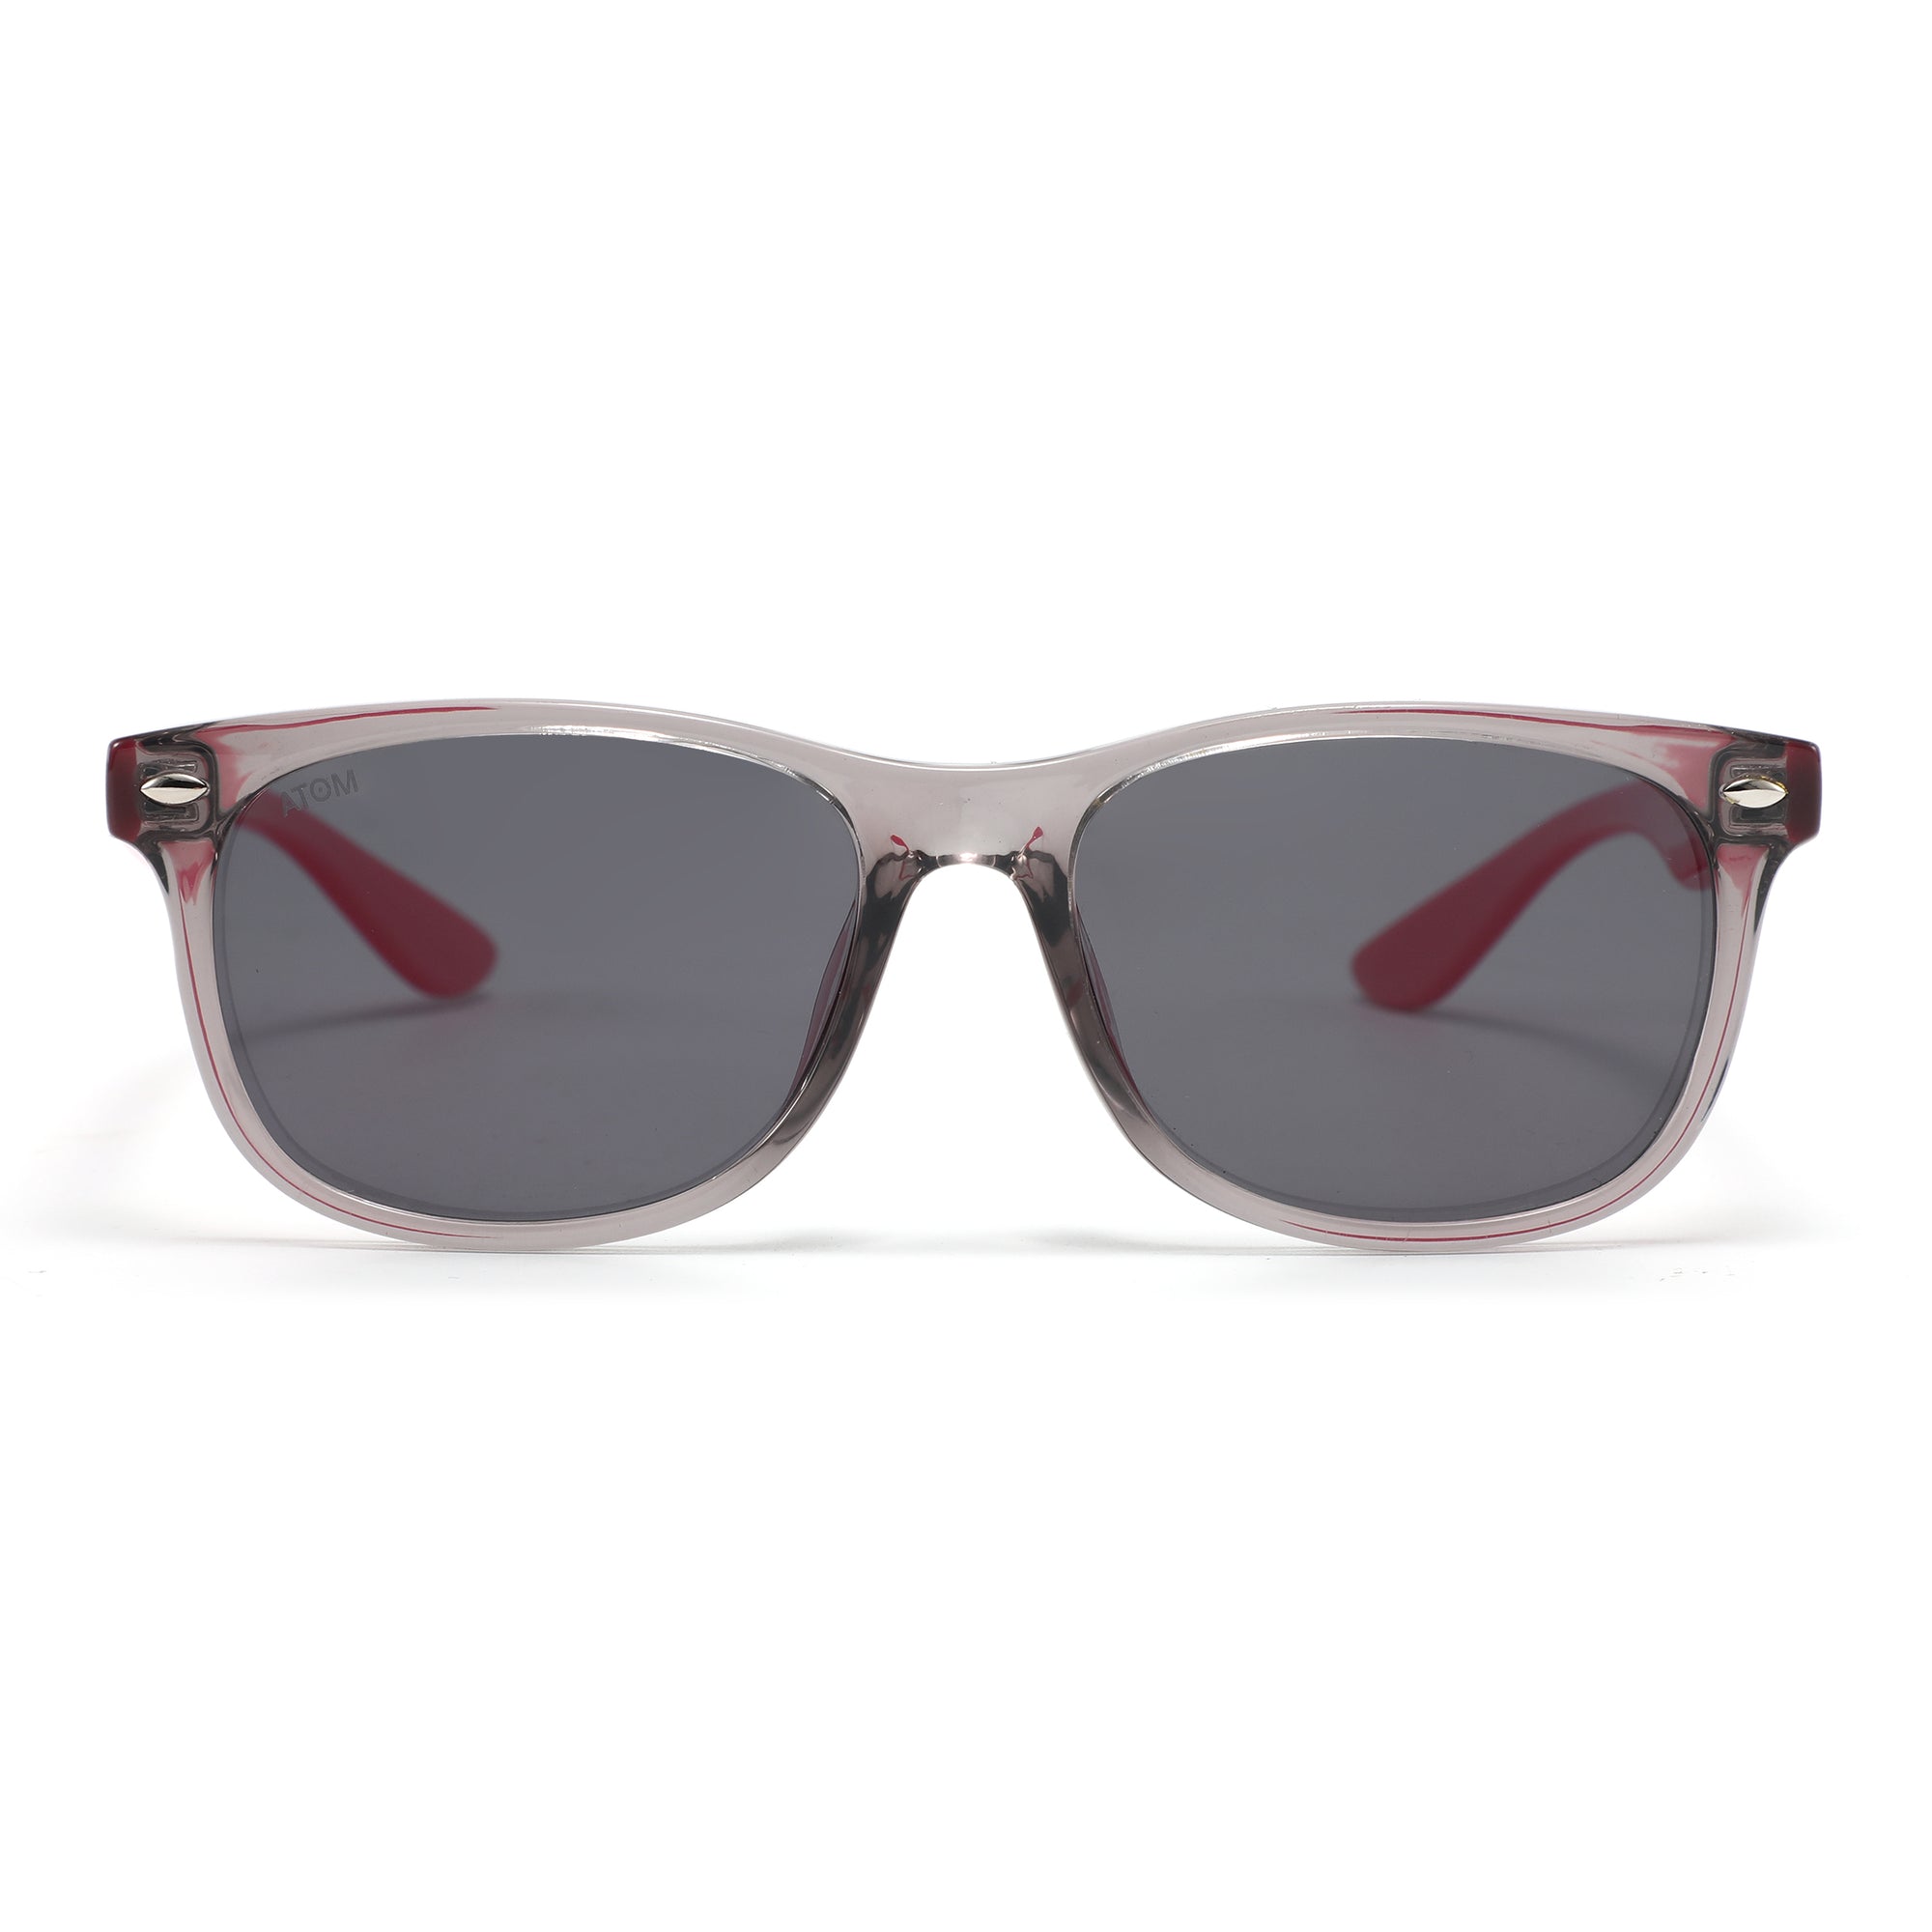 ATOM AS2-1 girls sunglasses featuring pink frames with red temple accents